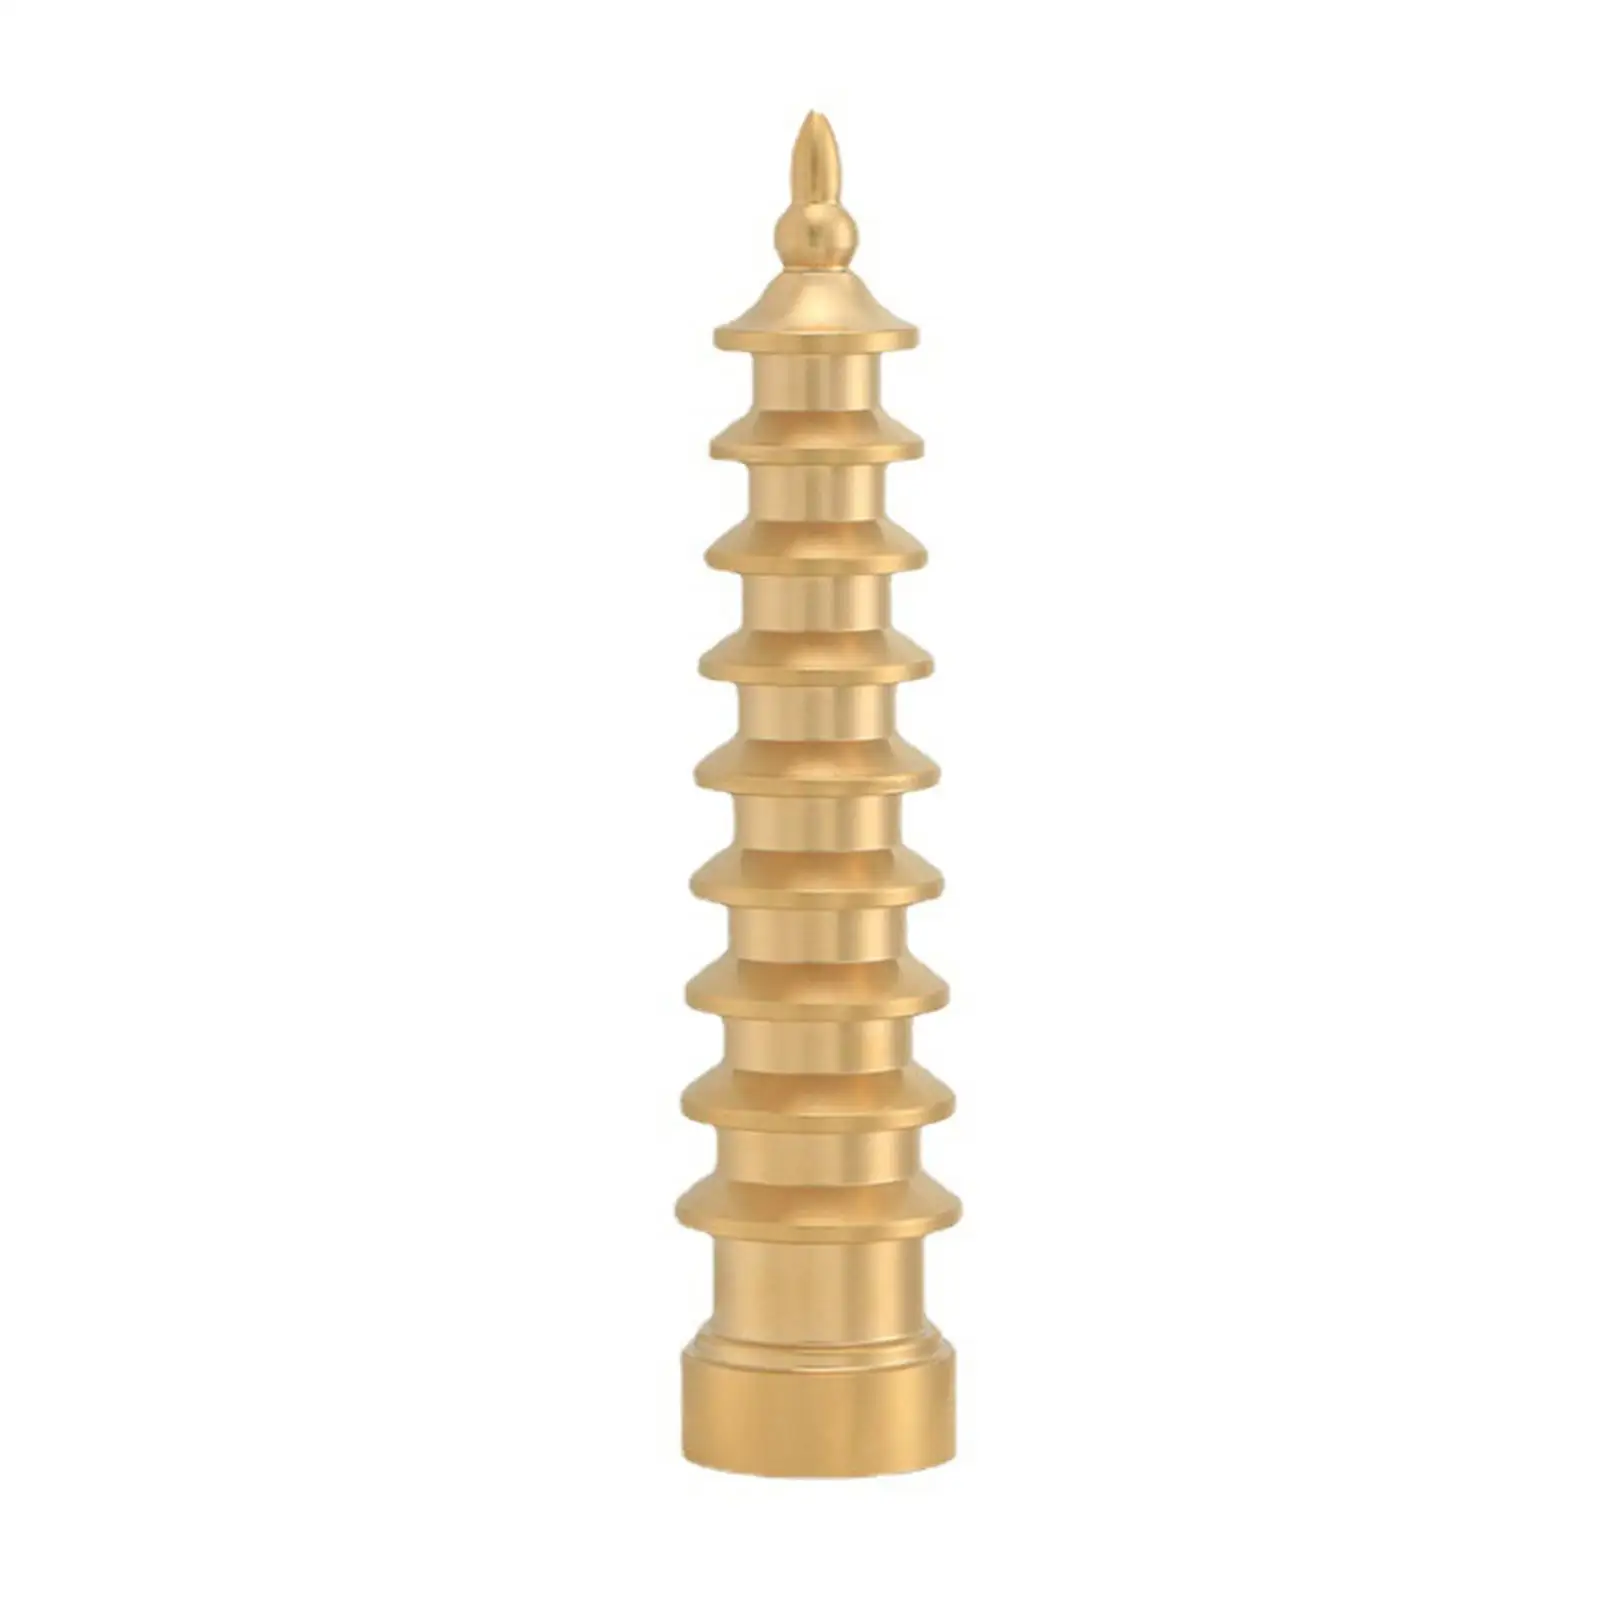 Brass Pagoda Feng Shui Statue Ornaments Protection Business Rises for Office Home